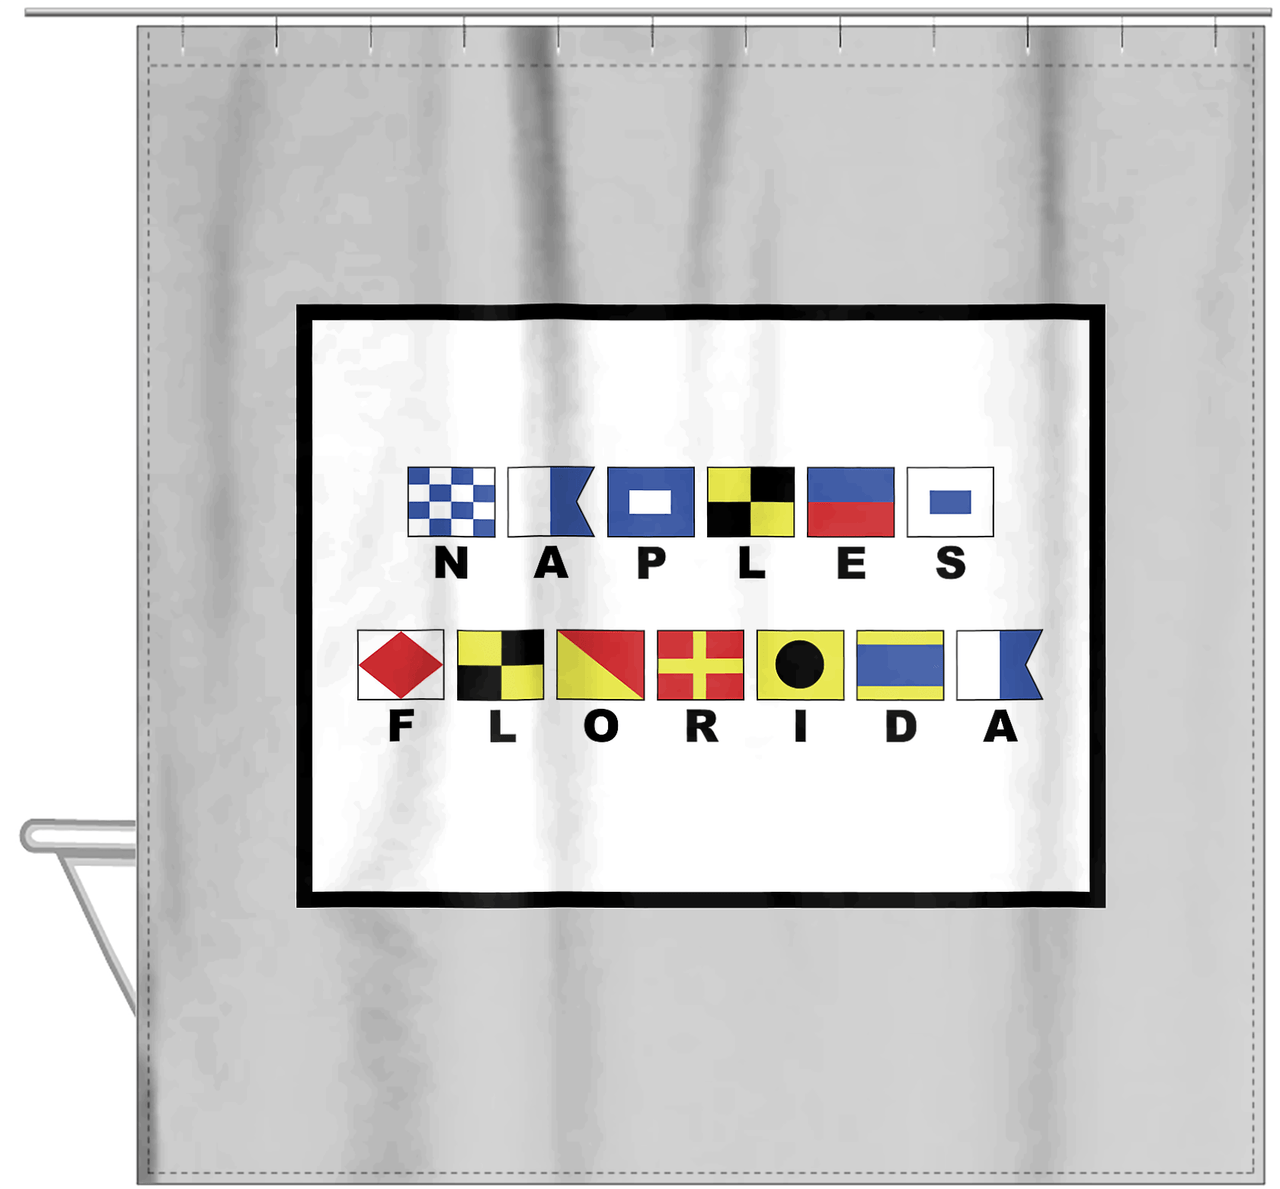 Personalized Nautical Flags Shower Curtain - Grey and Black - Flags With Large Letters - Hanging View